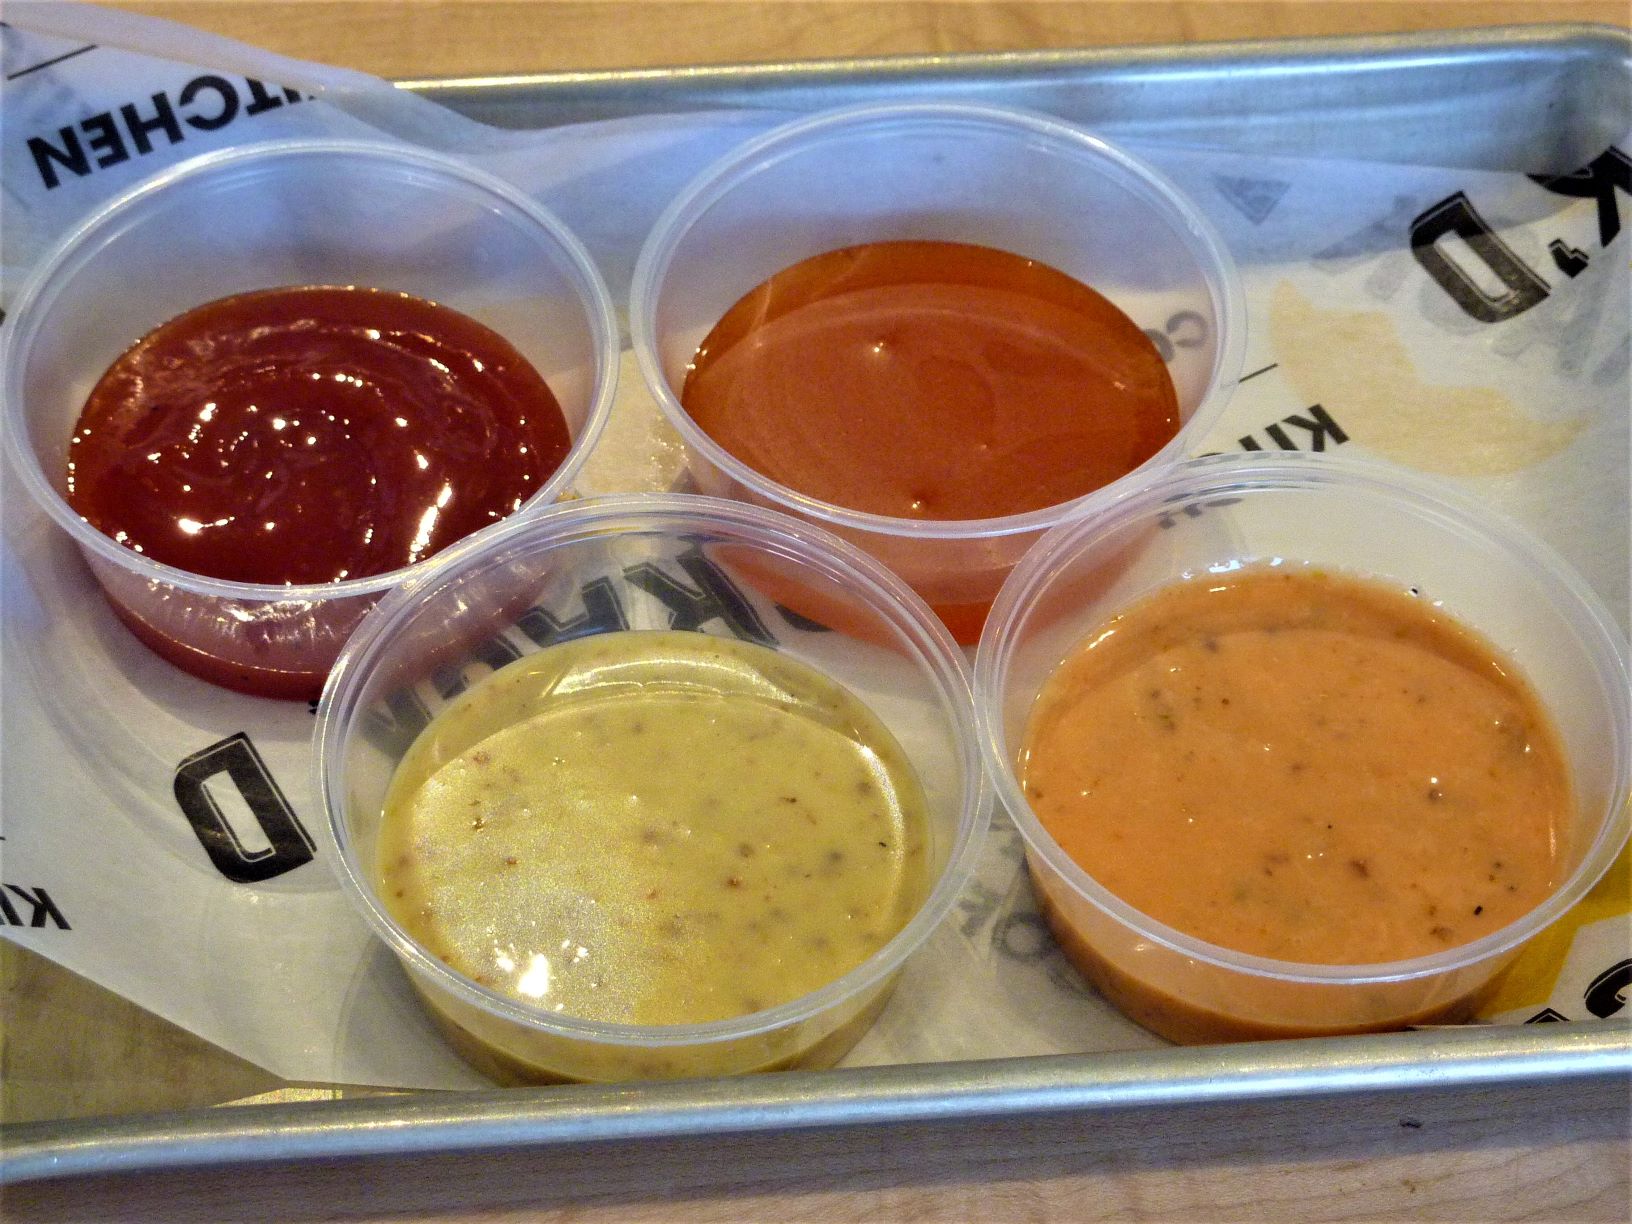 Homemade sauces from CRACK'D in Andover, Mass.